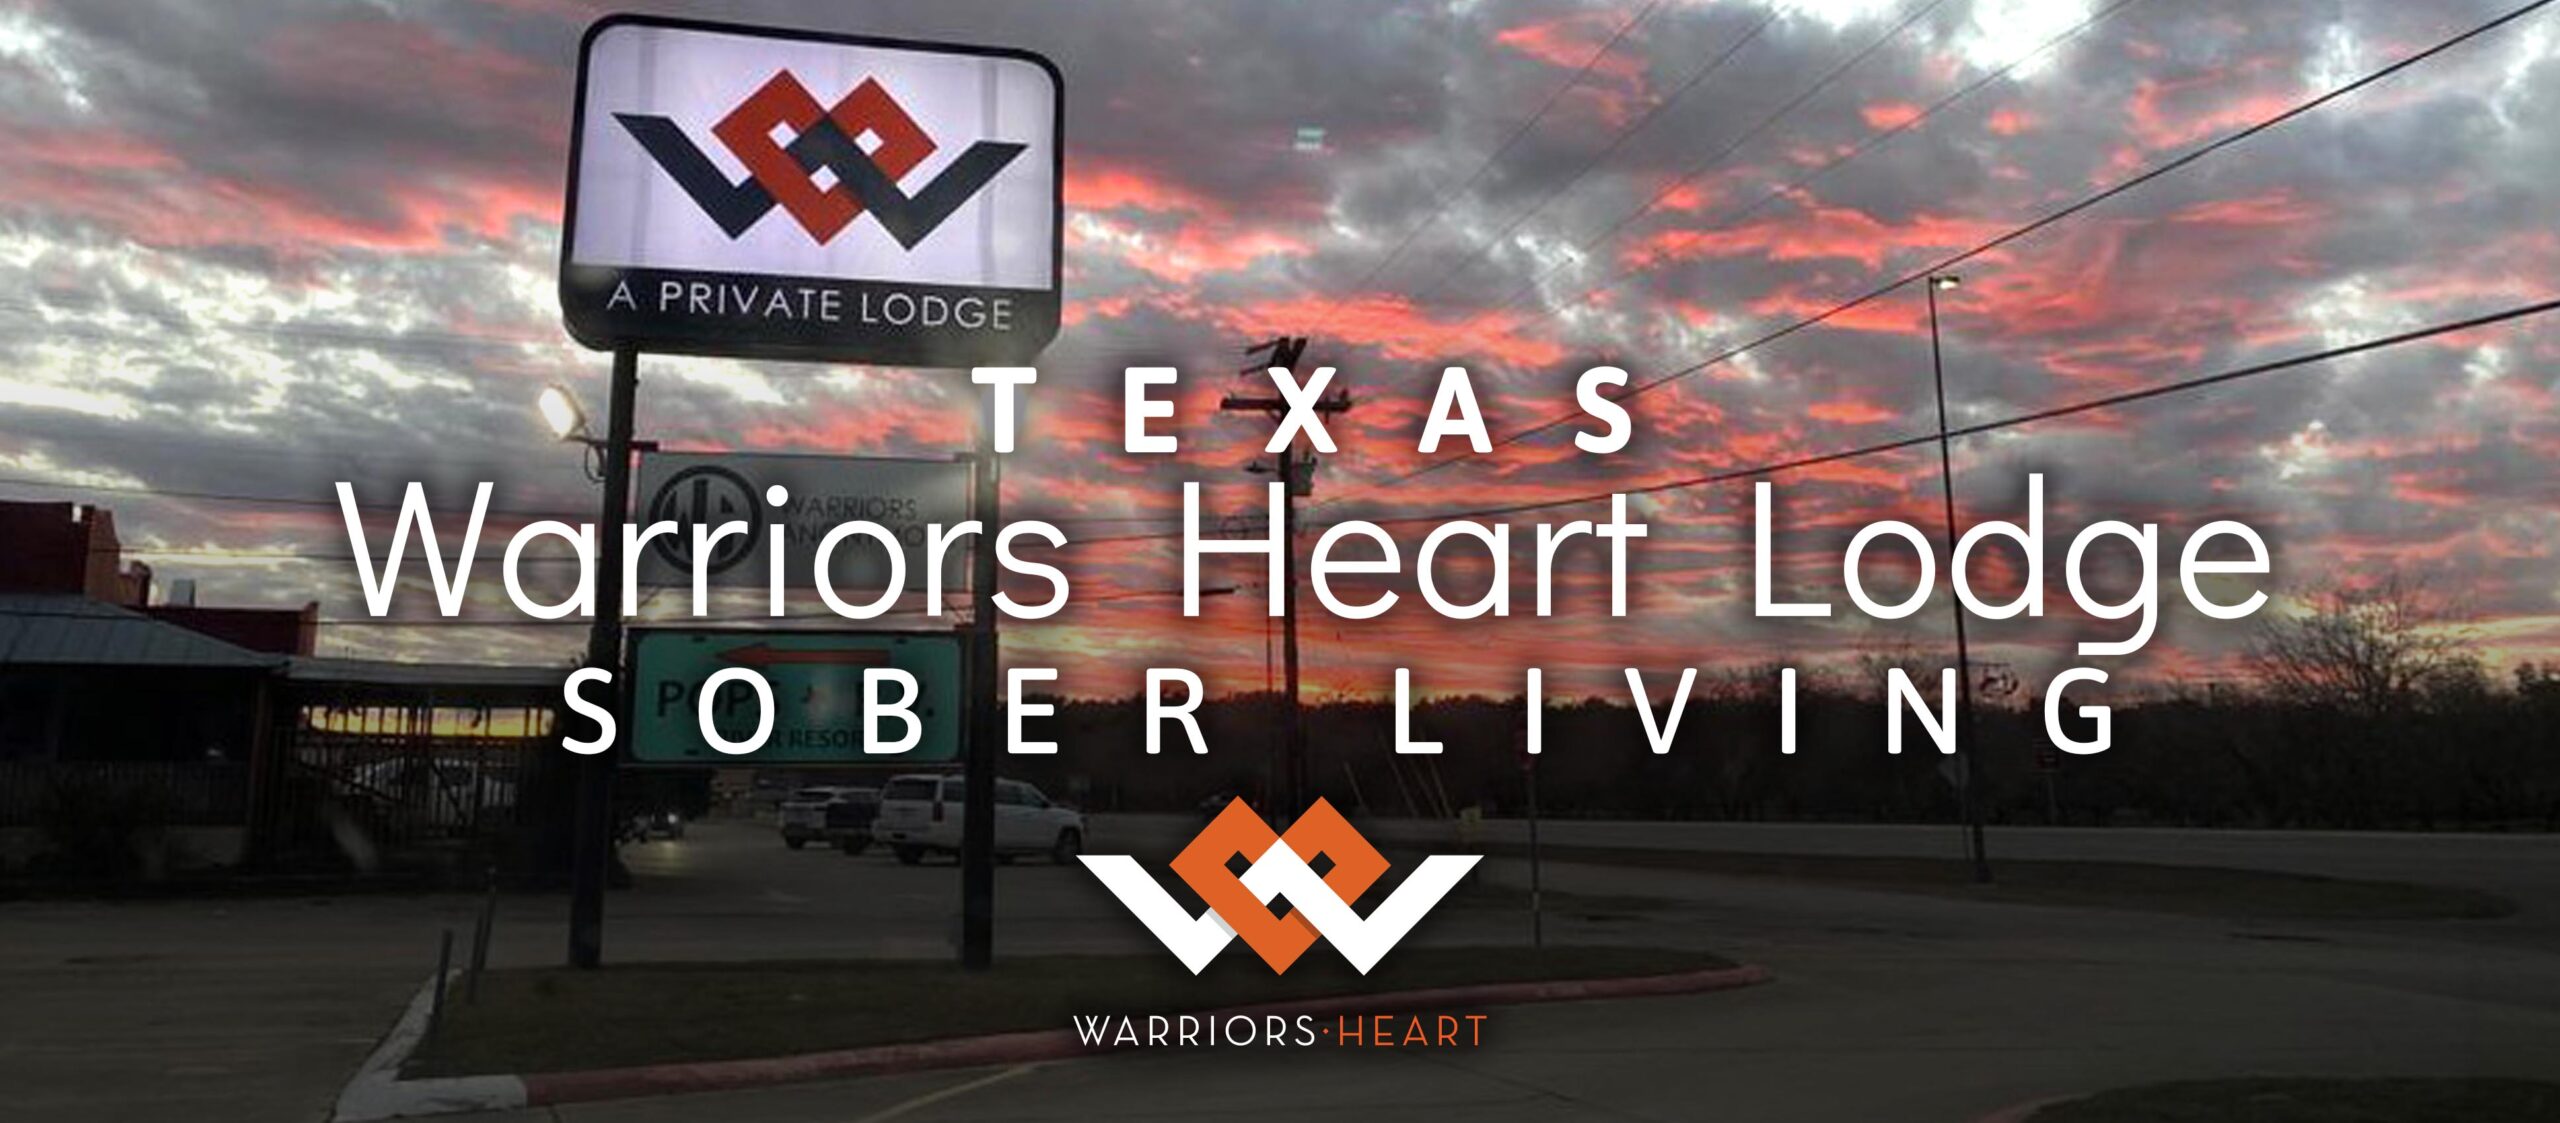 Warriors Heart Lodge - Sober Living - Warriors Heart is an addiction and PTSD treatment center for active military, veterans, and first responders. Contact us today at (844) 448-2567.